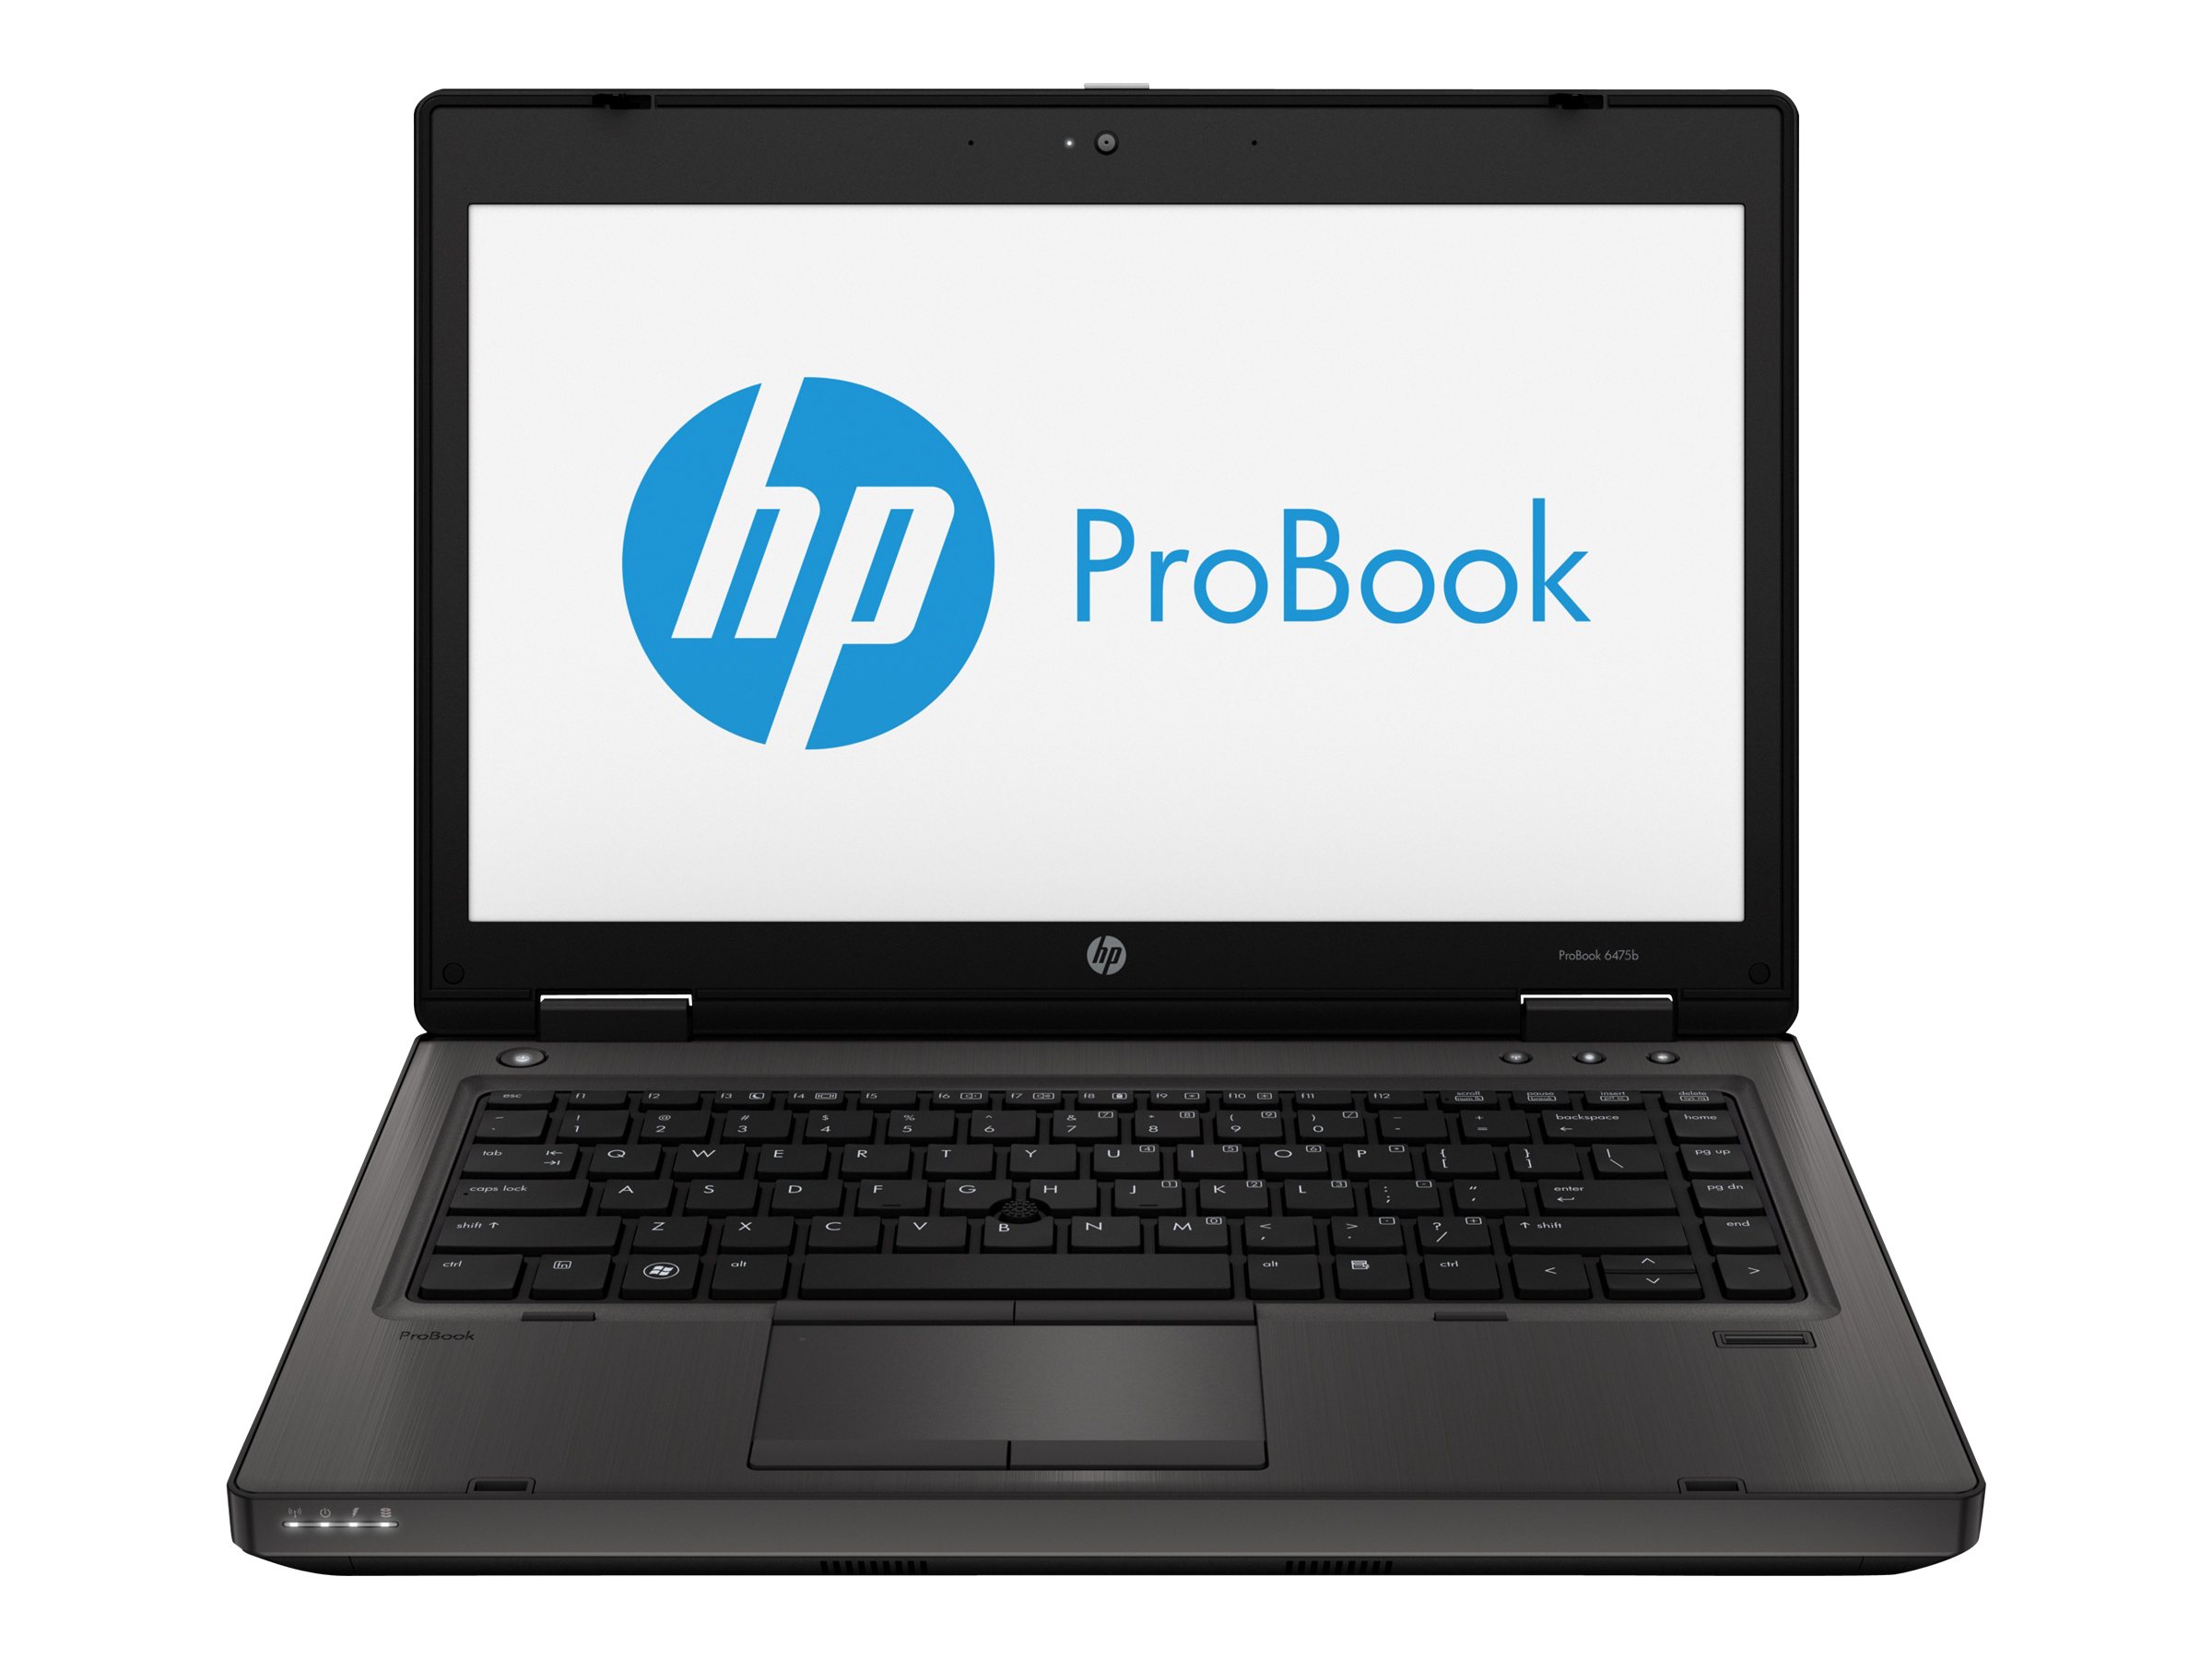 HP ProBook 4740s - full specs, details and review